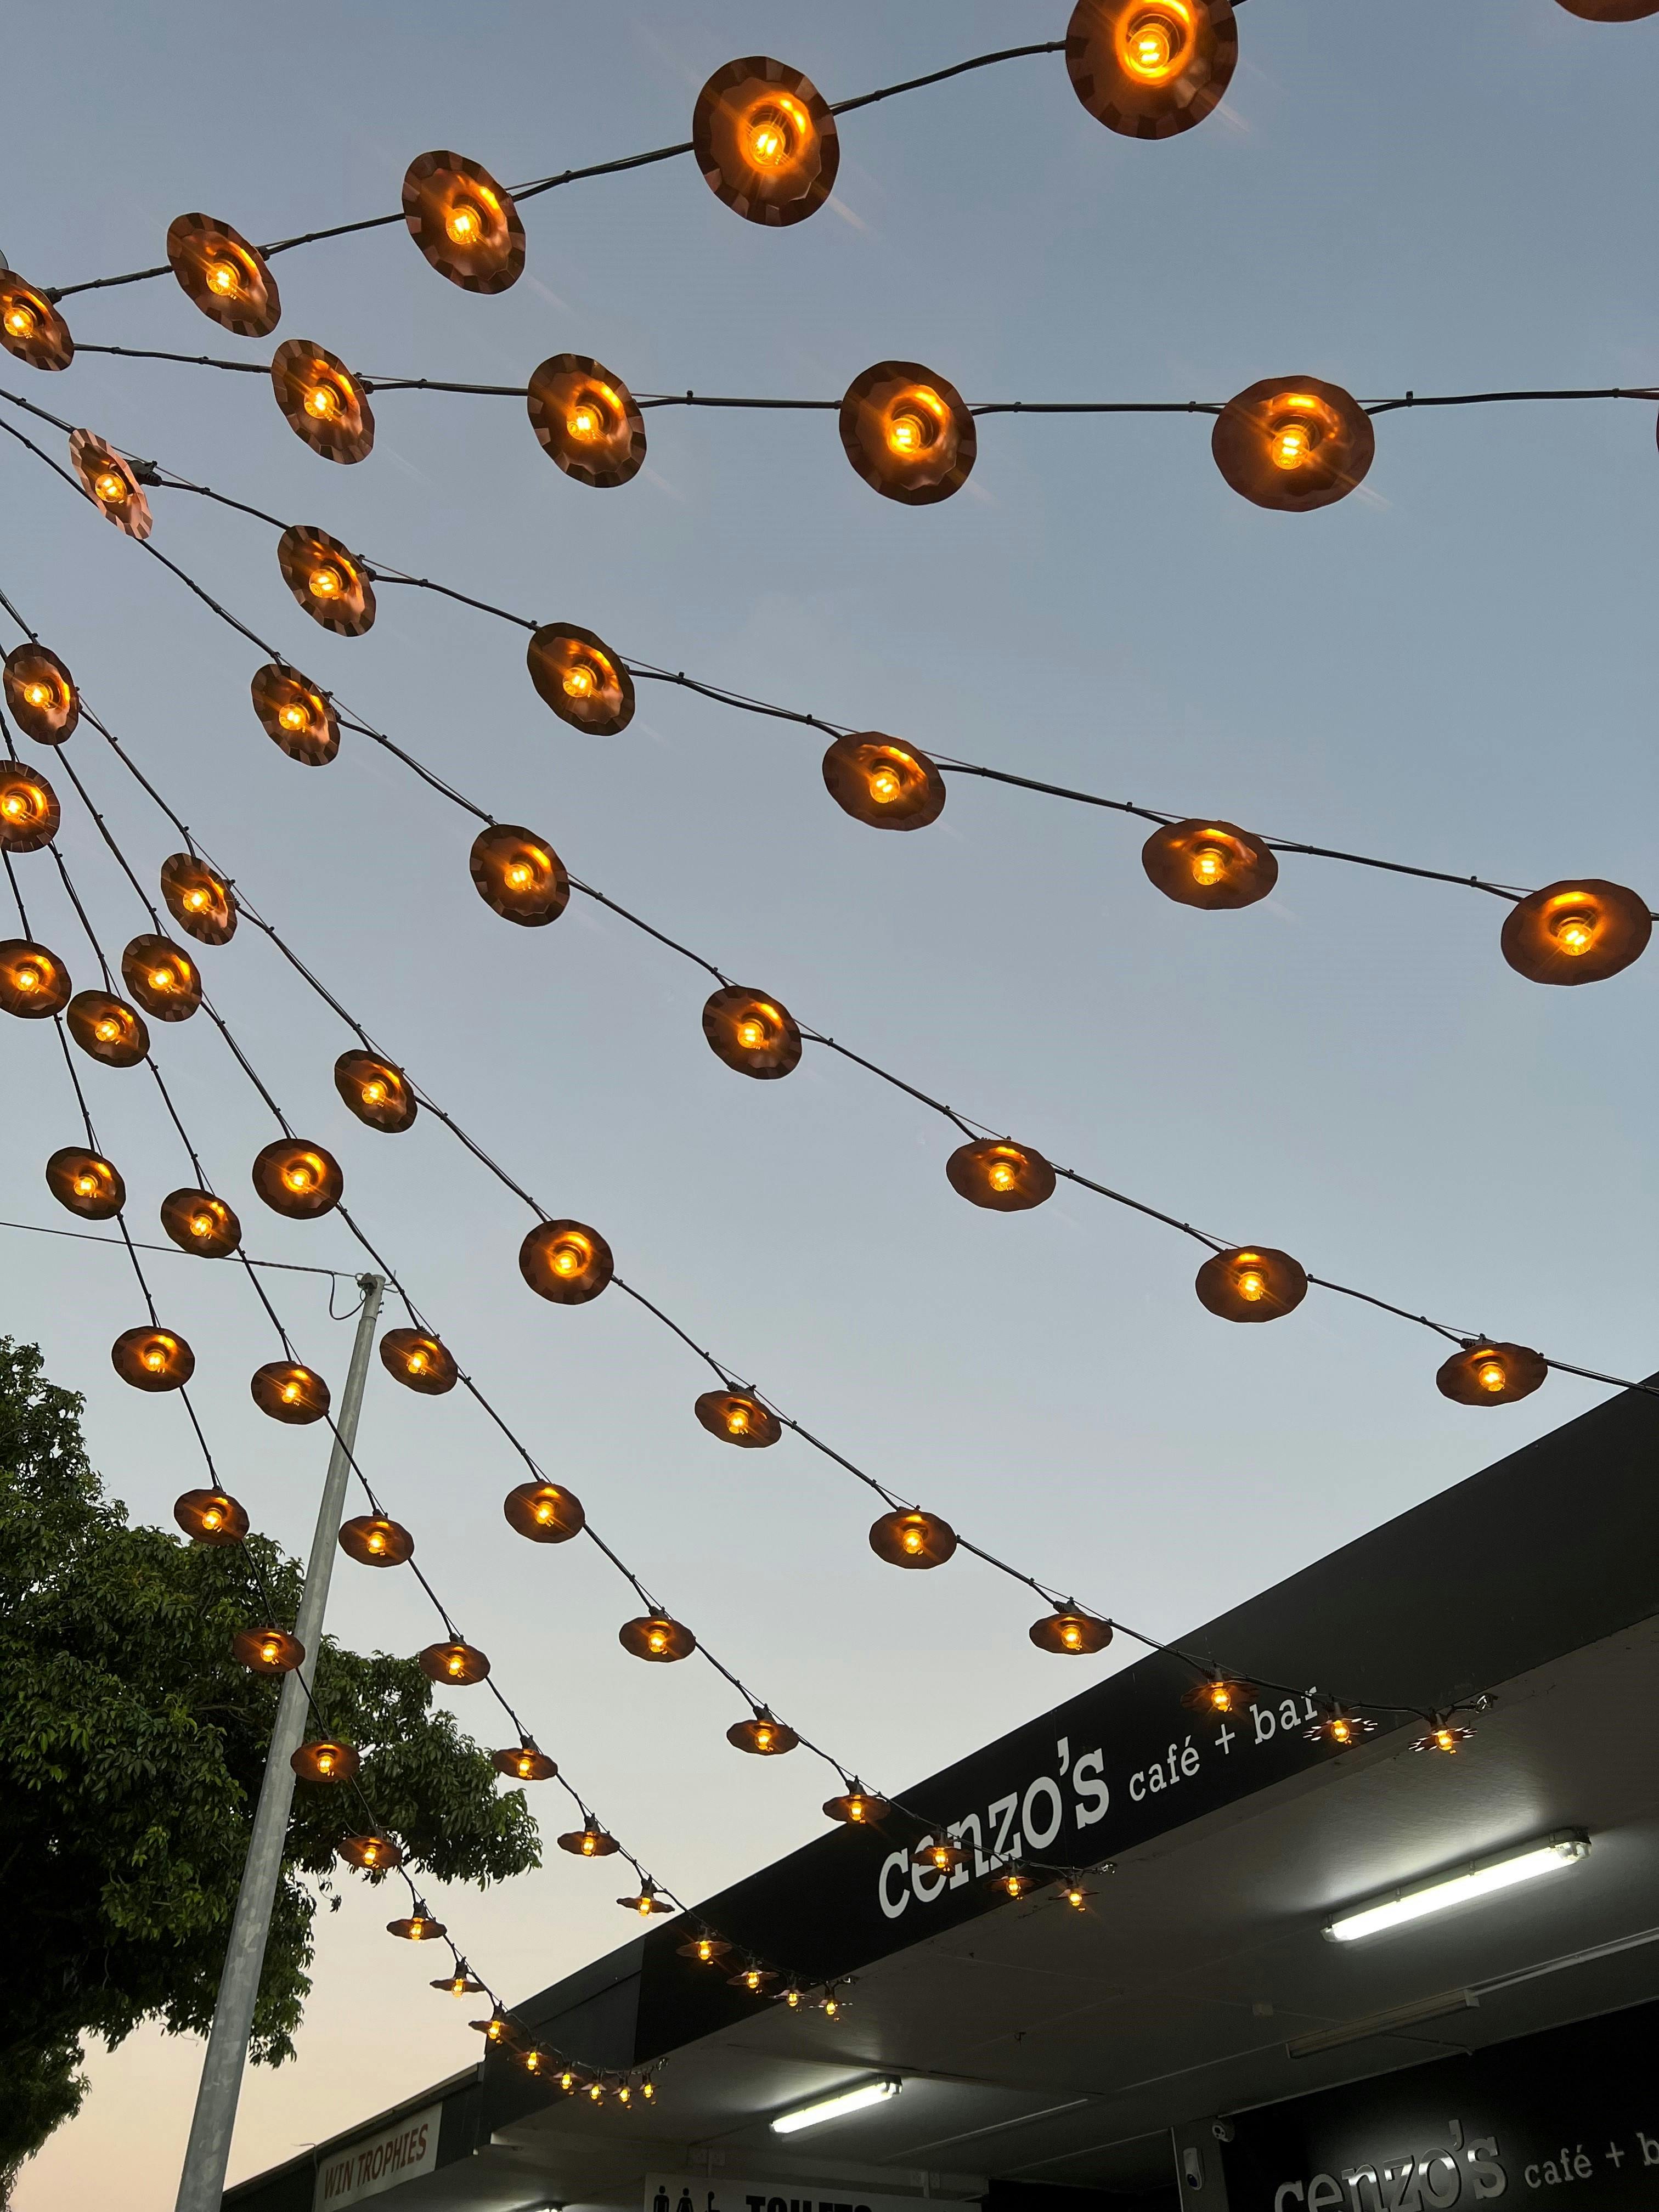 Close up of the new catenary lighting showing the warm glow of the lights against the dusk sky.  